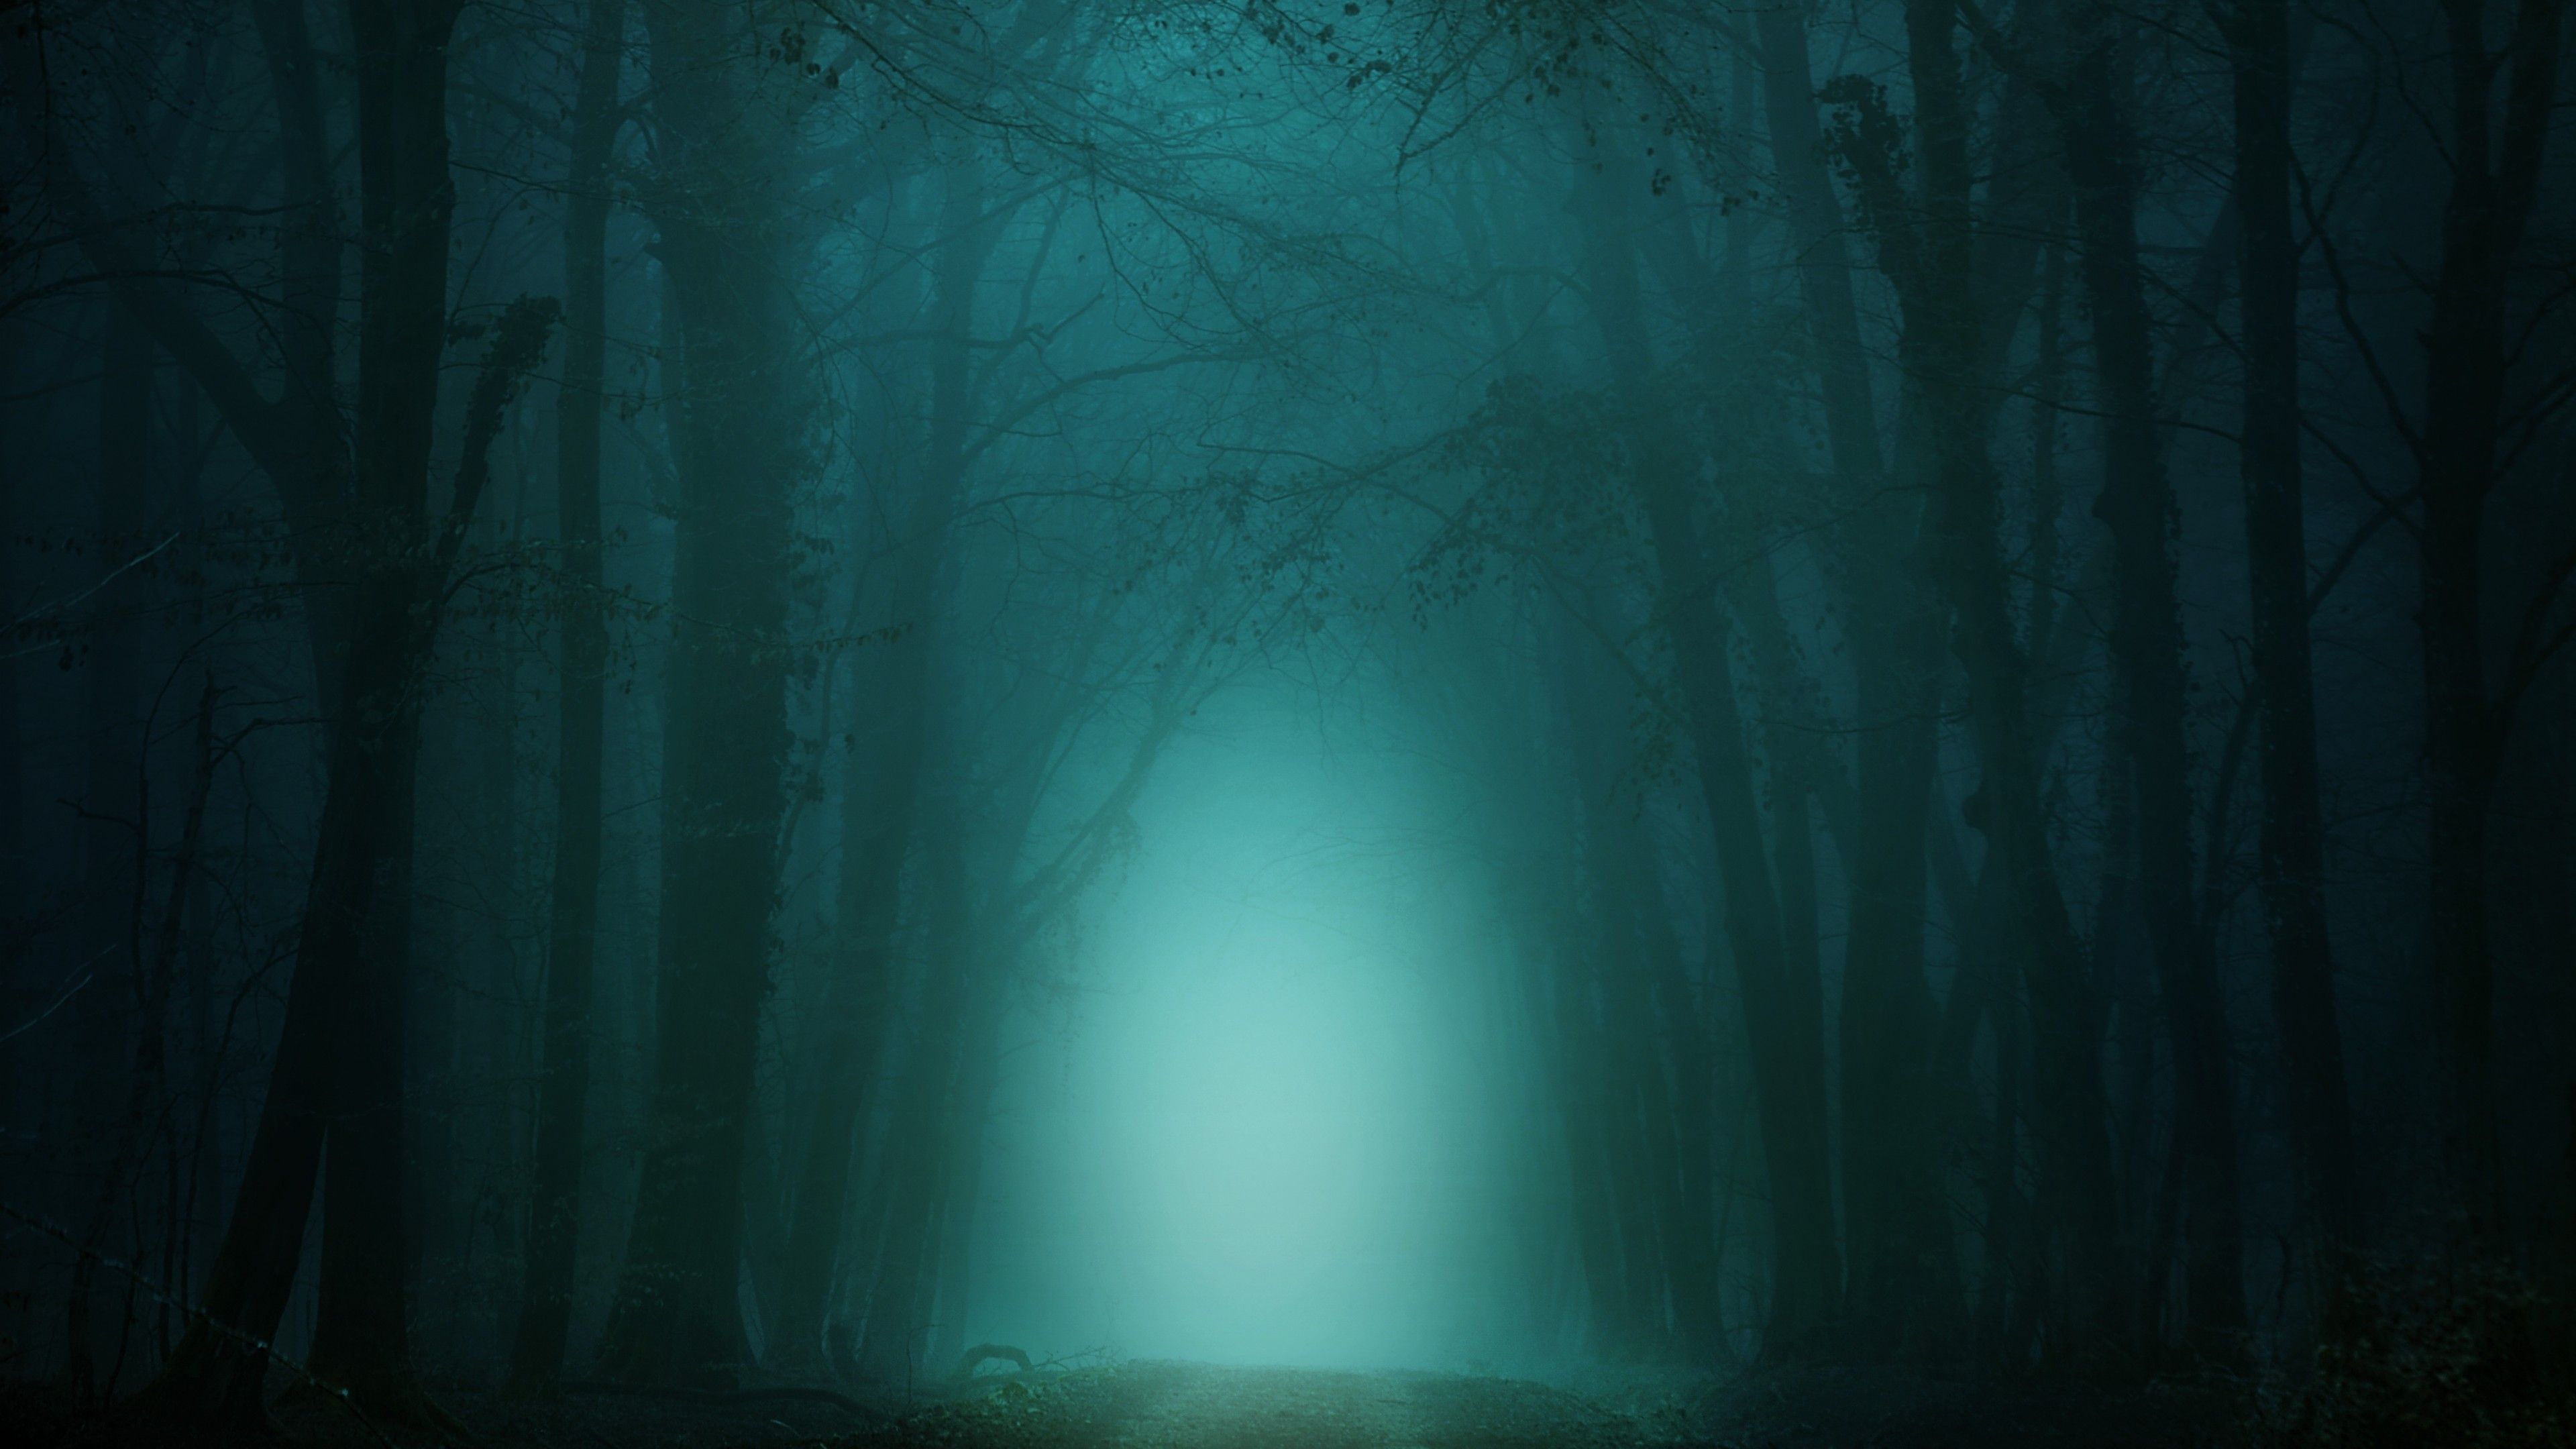 Forest 4K Wallpaper, Path, Foggy, Morning, Teal, Cold, Turquoise, Trees, 5K, Nature